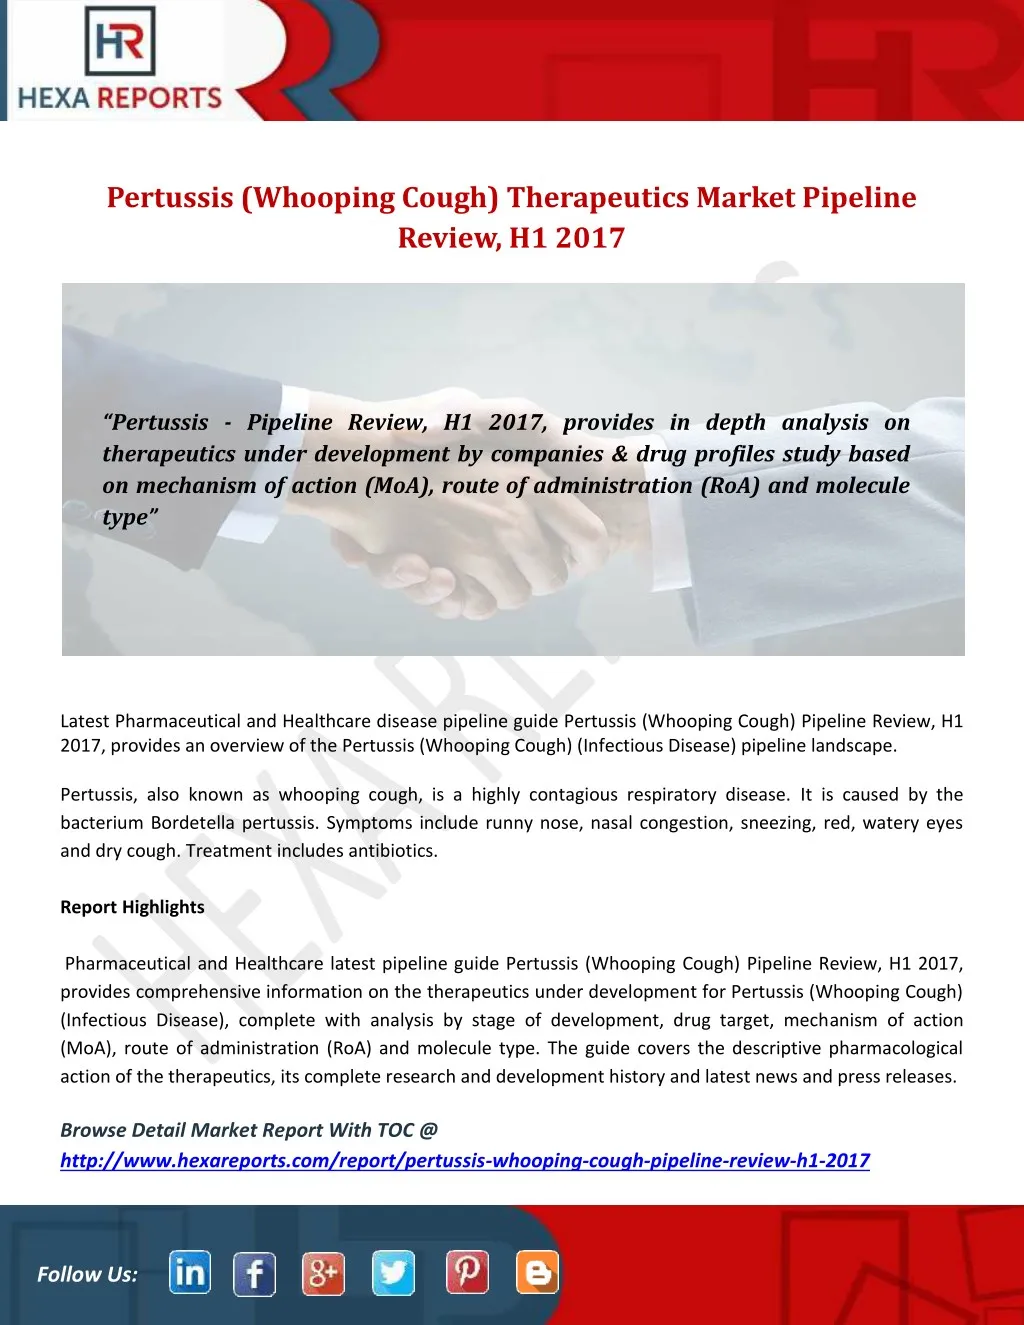 pertussis whooping cough therapeutics market